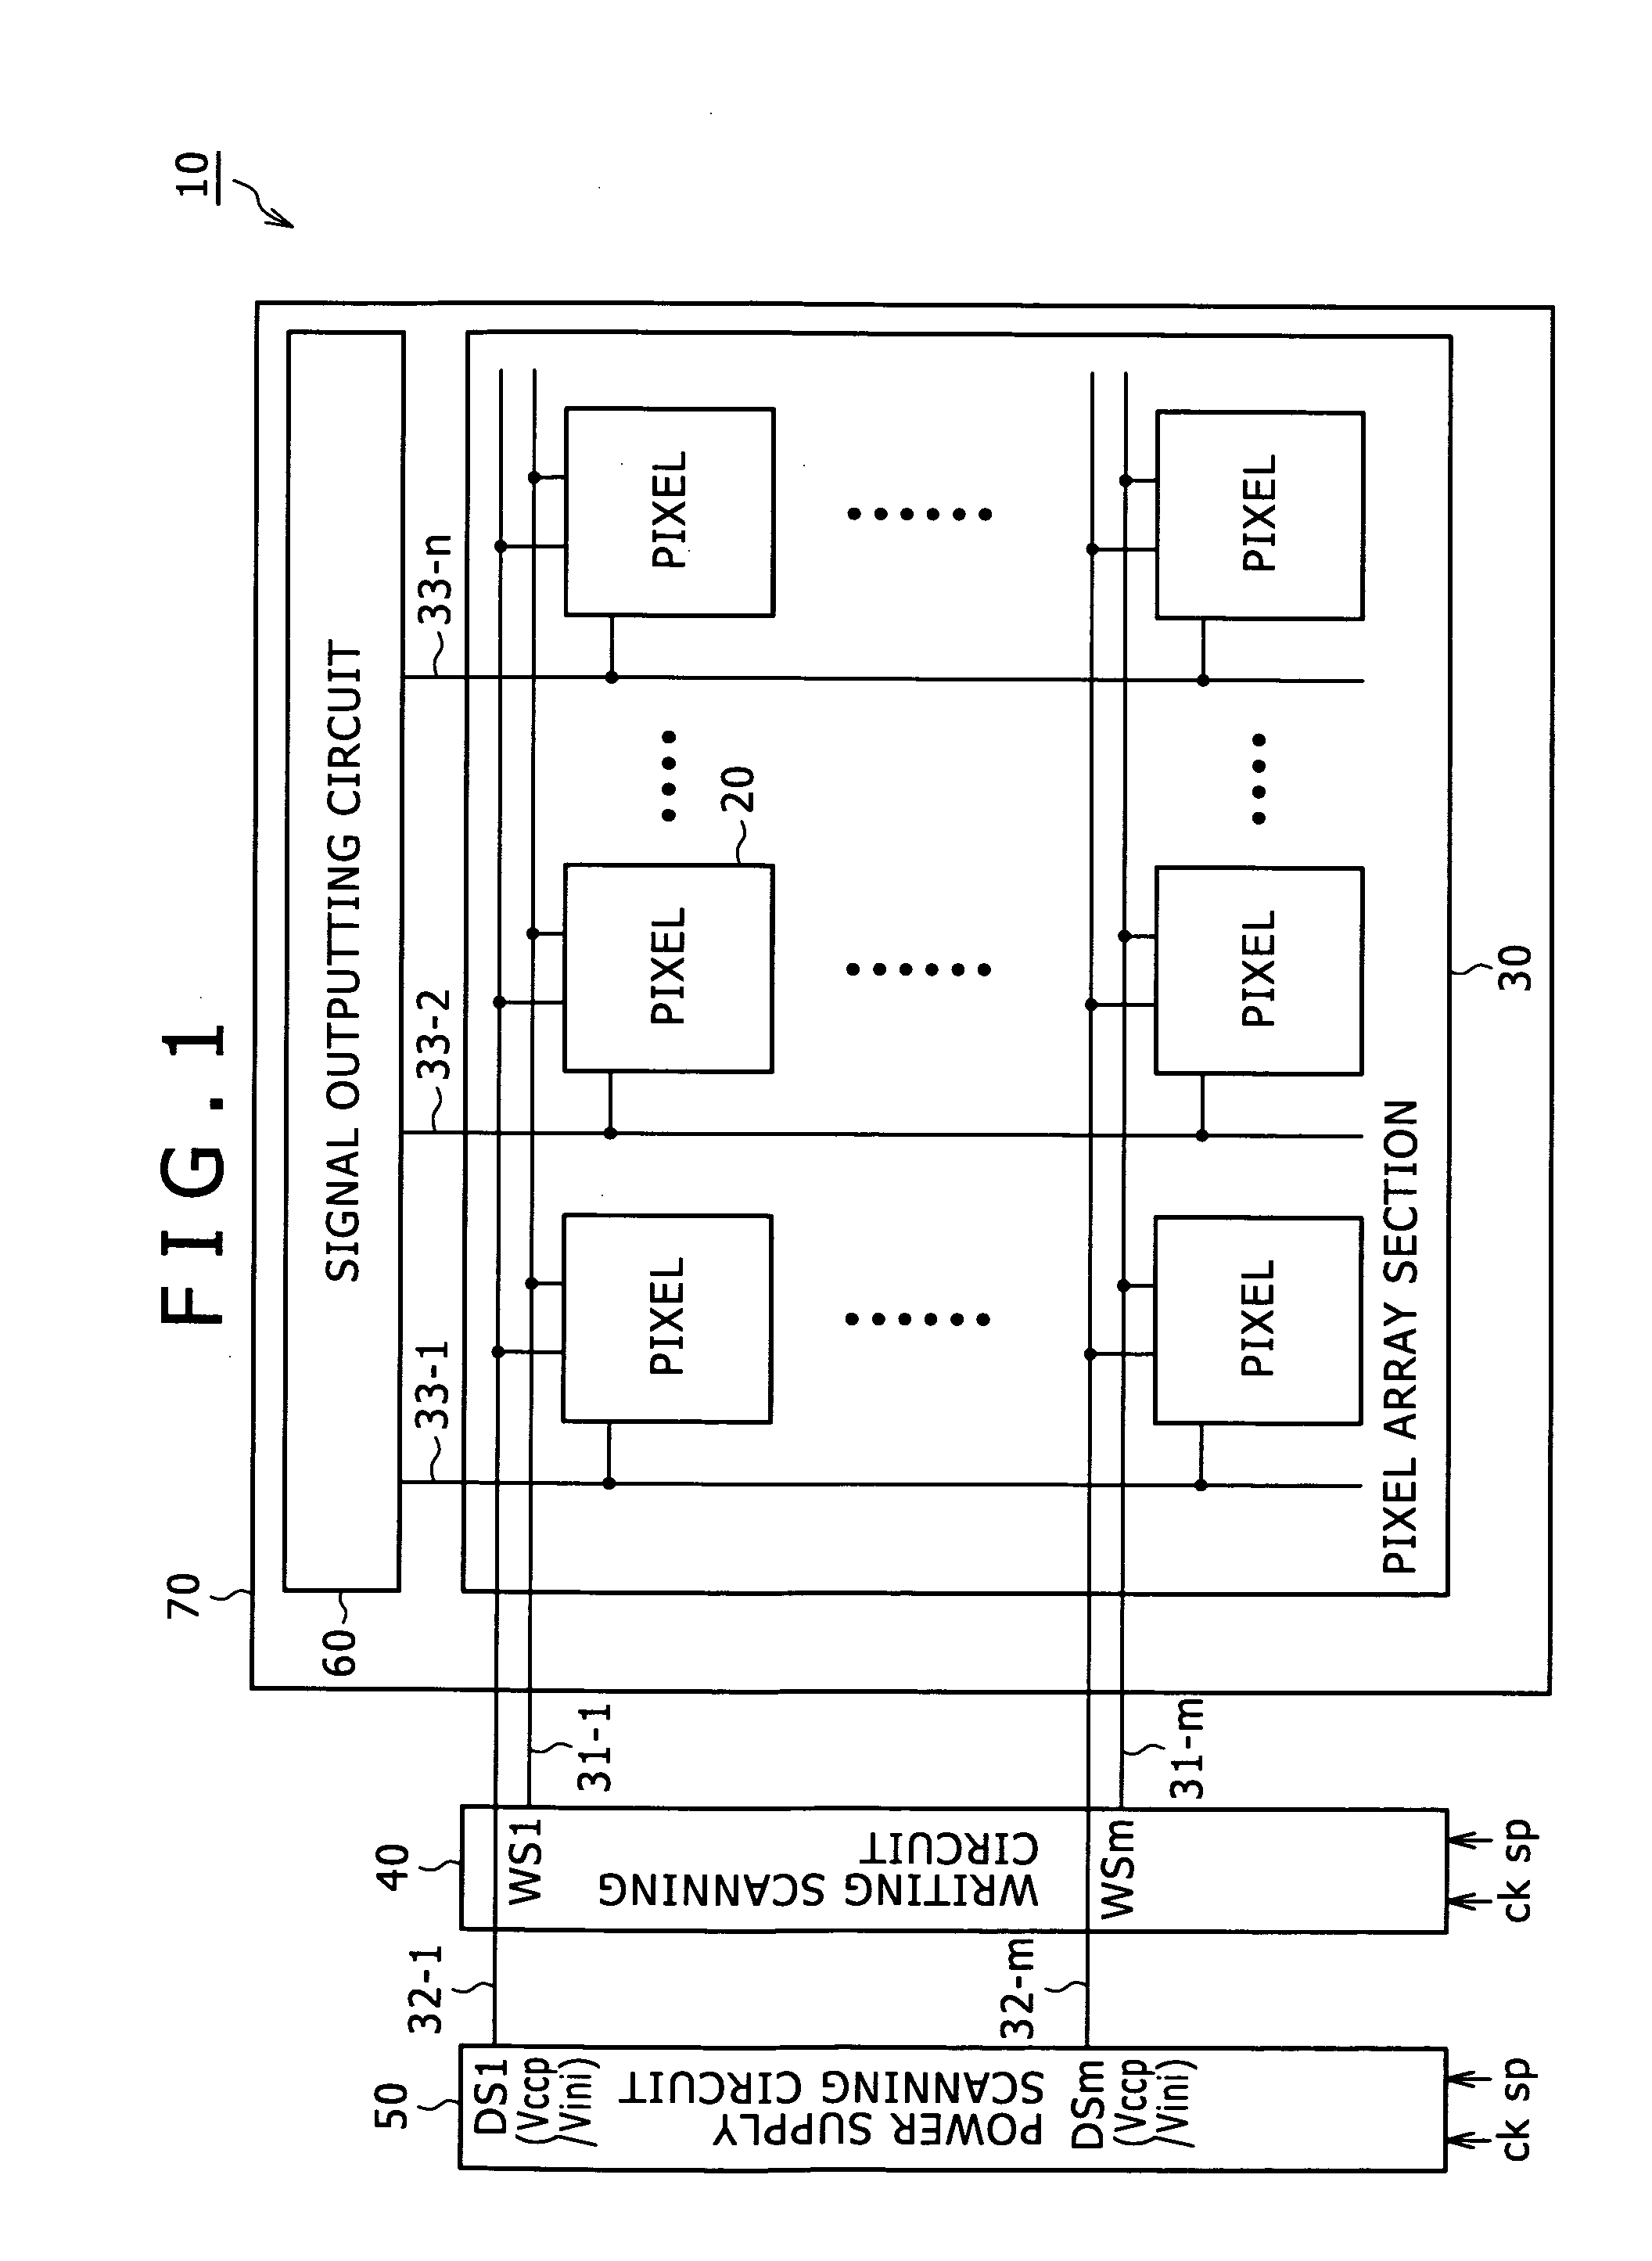 Display apparatus and electronic apparatus